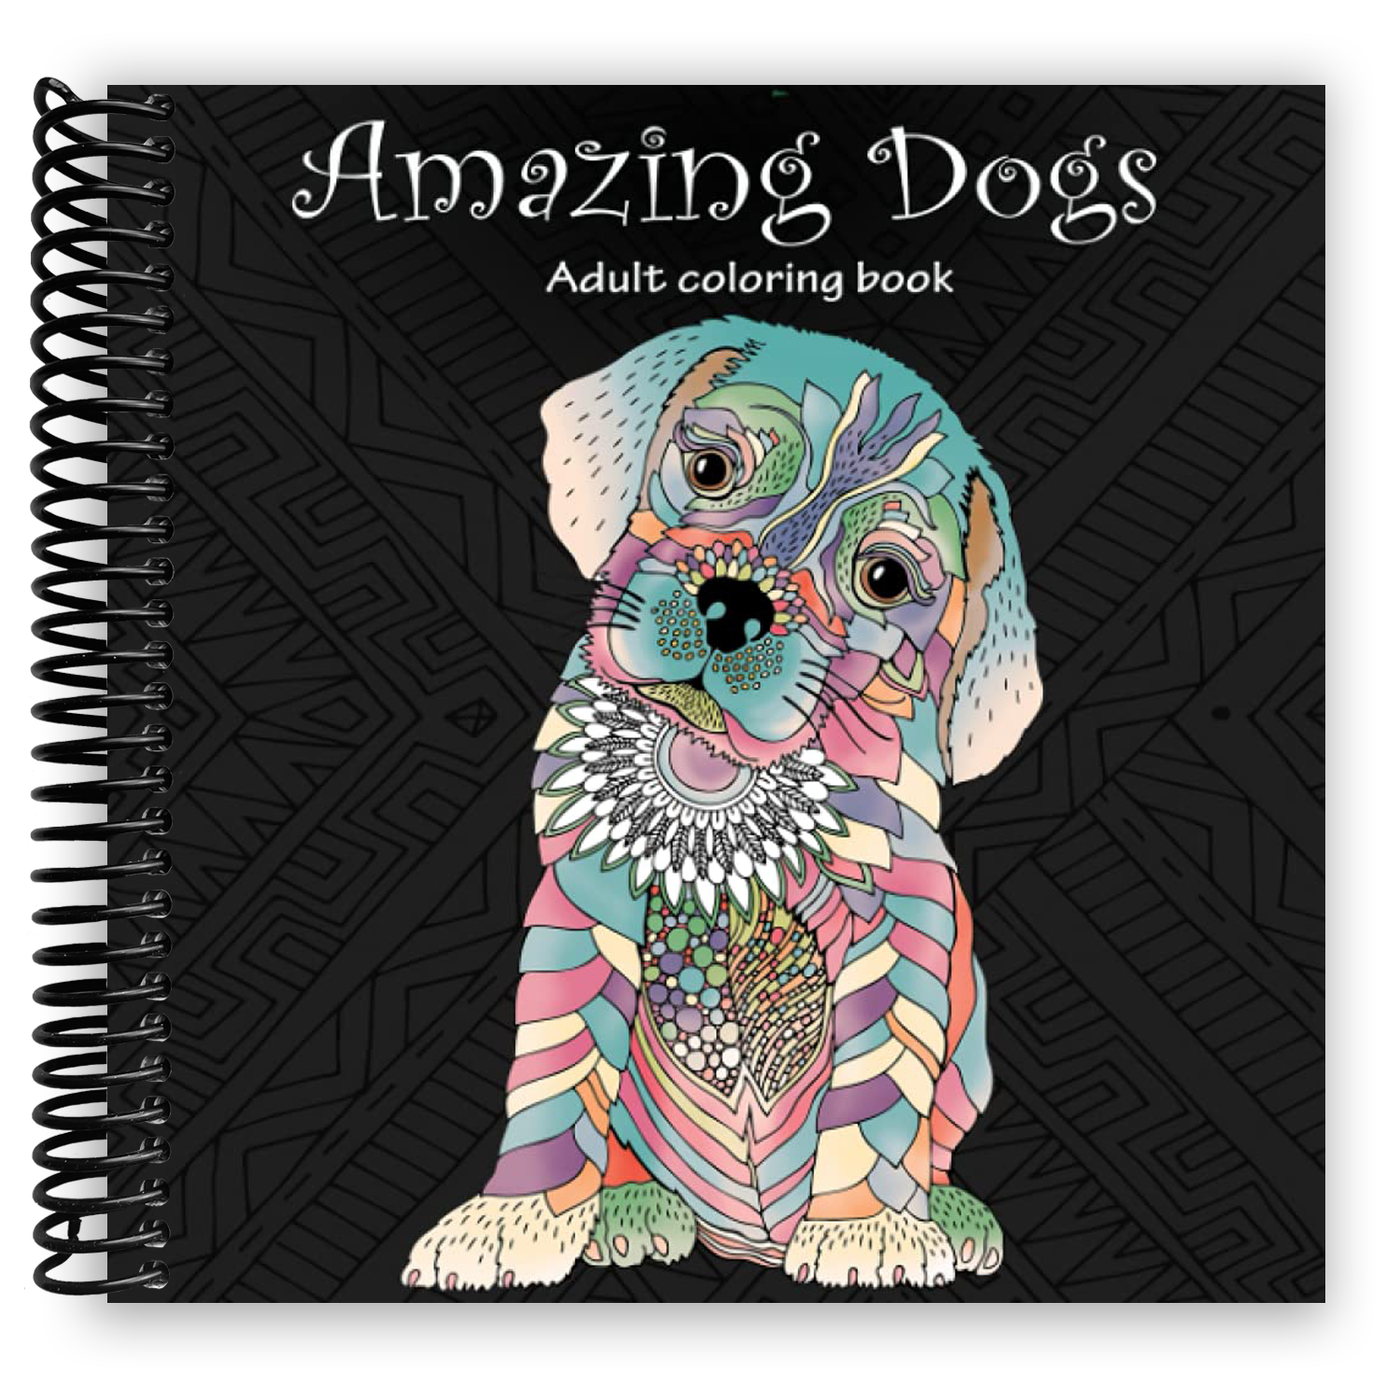 Amazing Dogs: Adult Coloring Book (Stress Relieving Creative Fun Drawings to Calm Down, Reduce Anxiety & Relax.) (Spiral Bound)